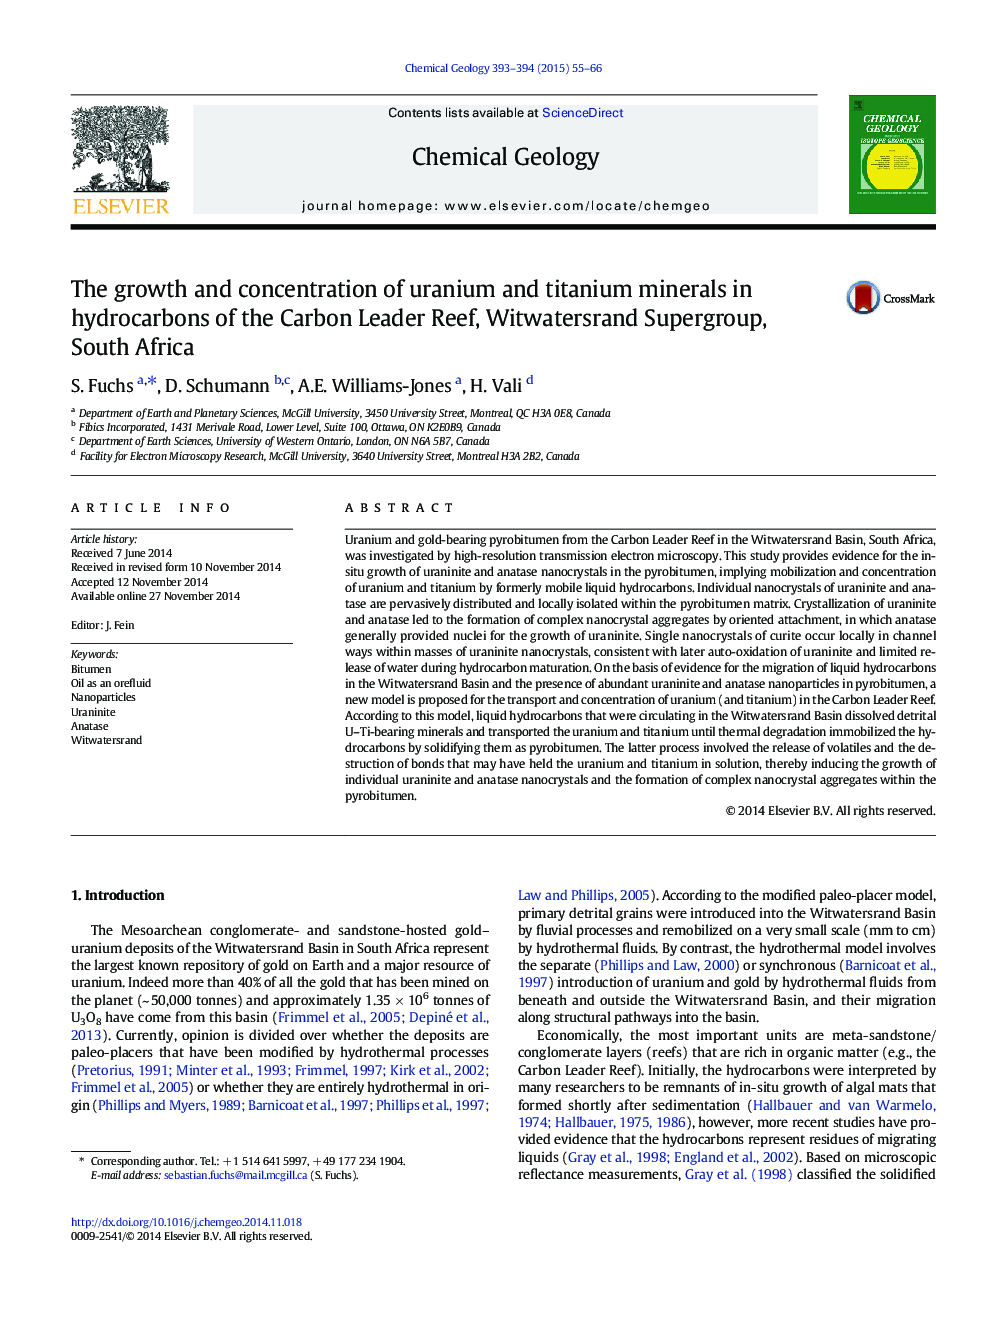 The growth and concentration of uranium and titanium minerals in hydrocarbons of the Carbon Leader Reef, Witwatersrand Supergroup, South Africa